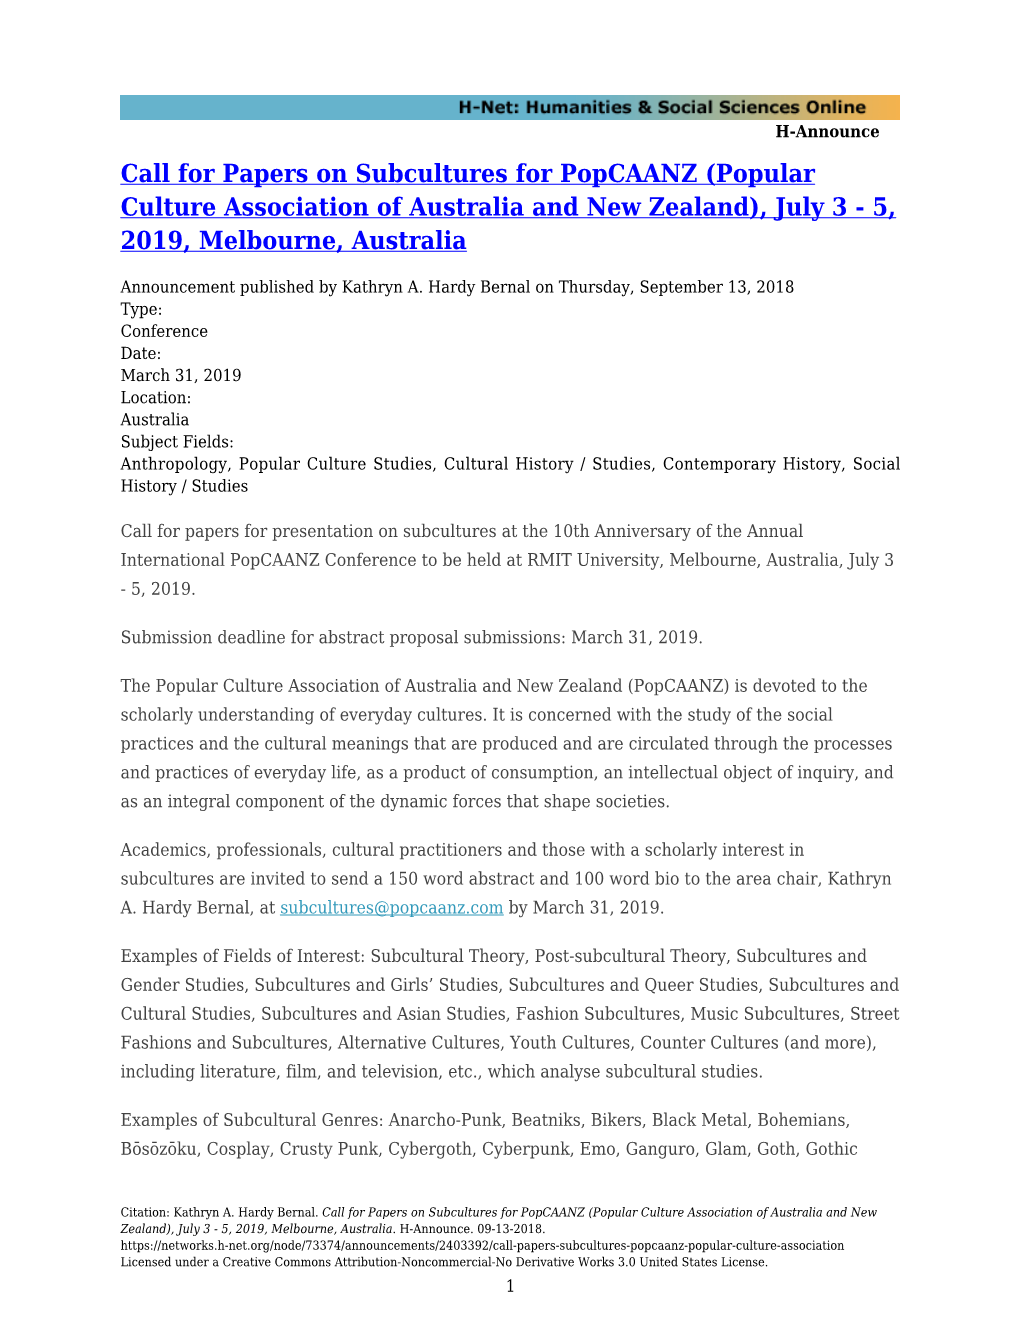 Call for Papers on Subcultures for Popcaanz (Popular Culture Association of Australia and New Zealand), July 3 - 5, 2019, Melbourne, Australia